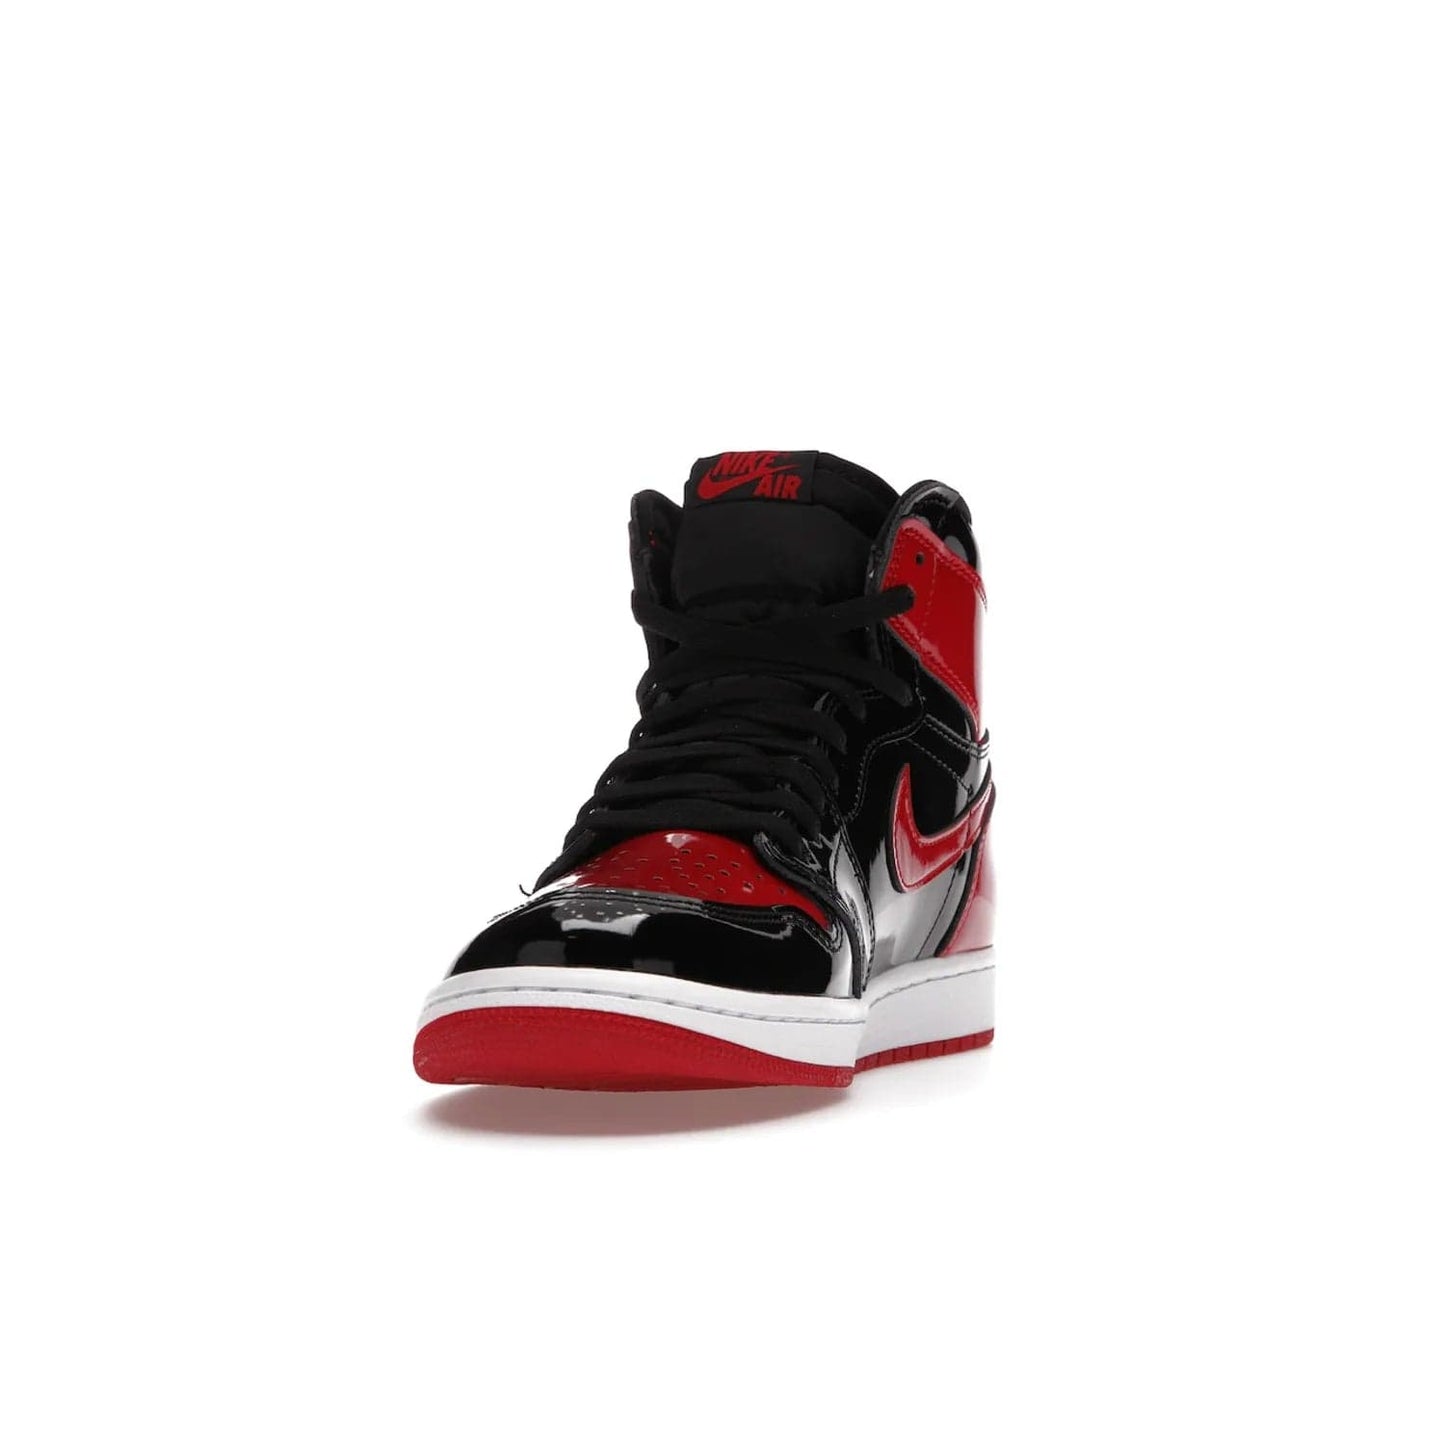 Jordan 1 Retro High OG Patent Bred - Image 12 - Only at www.BallersClubKickz.com - Introducing Air Jordan 1 Retro High OG Patent Bred - sleek patent leather upper, signature weaved Nike Air tongue and classic Wings logo on collar. Red and white sole complete signature look. Releasing December 2021 - perfect retro edition for holidays.